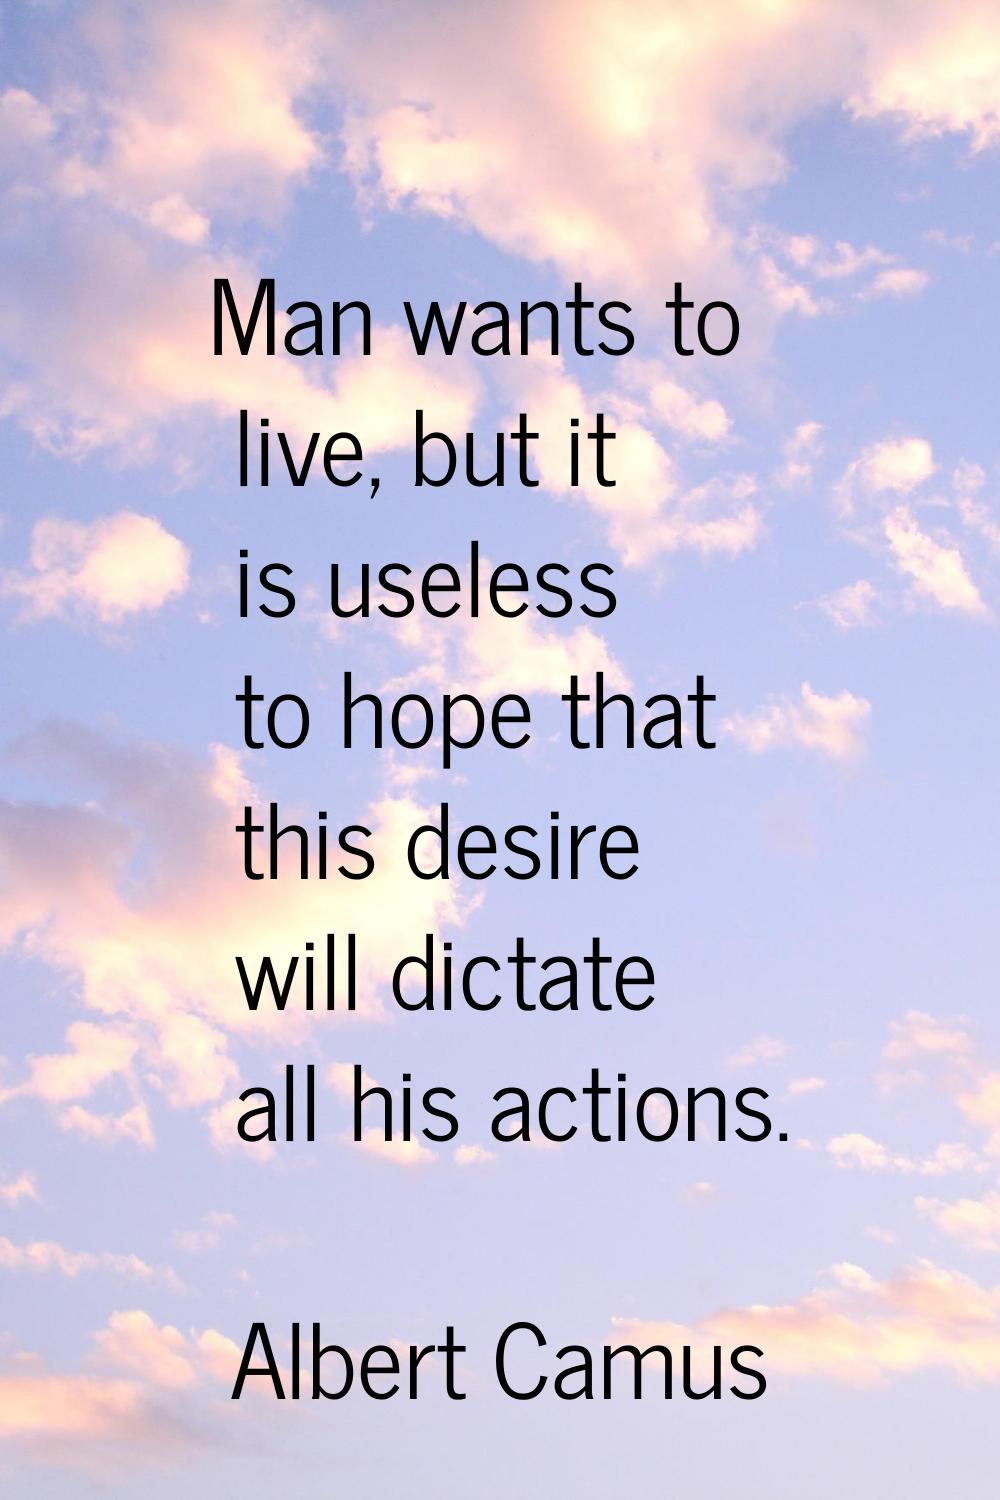 Man wants to live, but it is useless to hope that this desire will dictate all his actions.